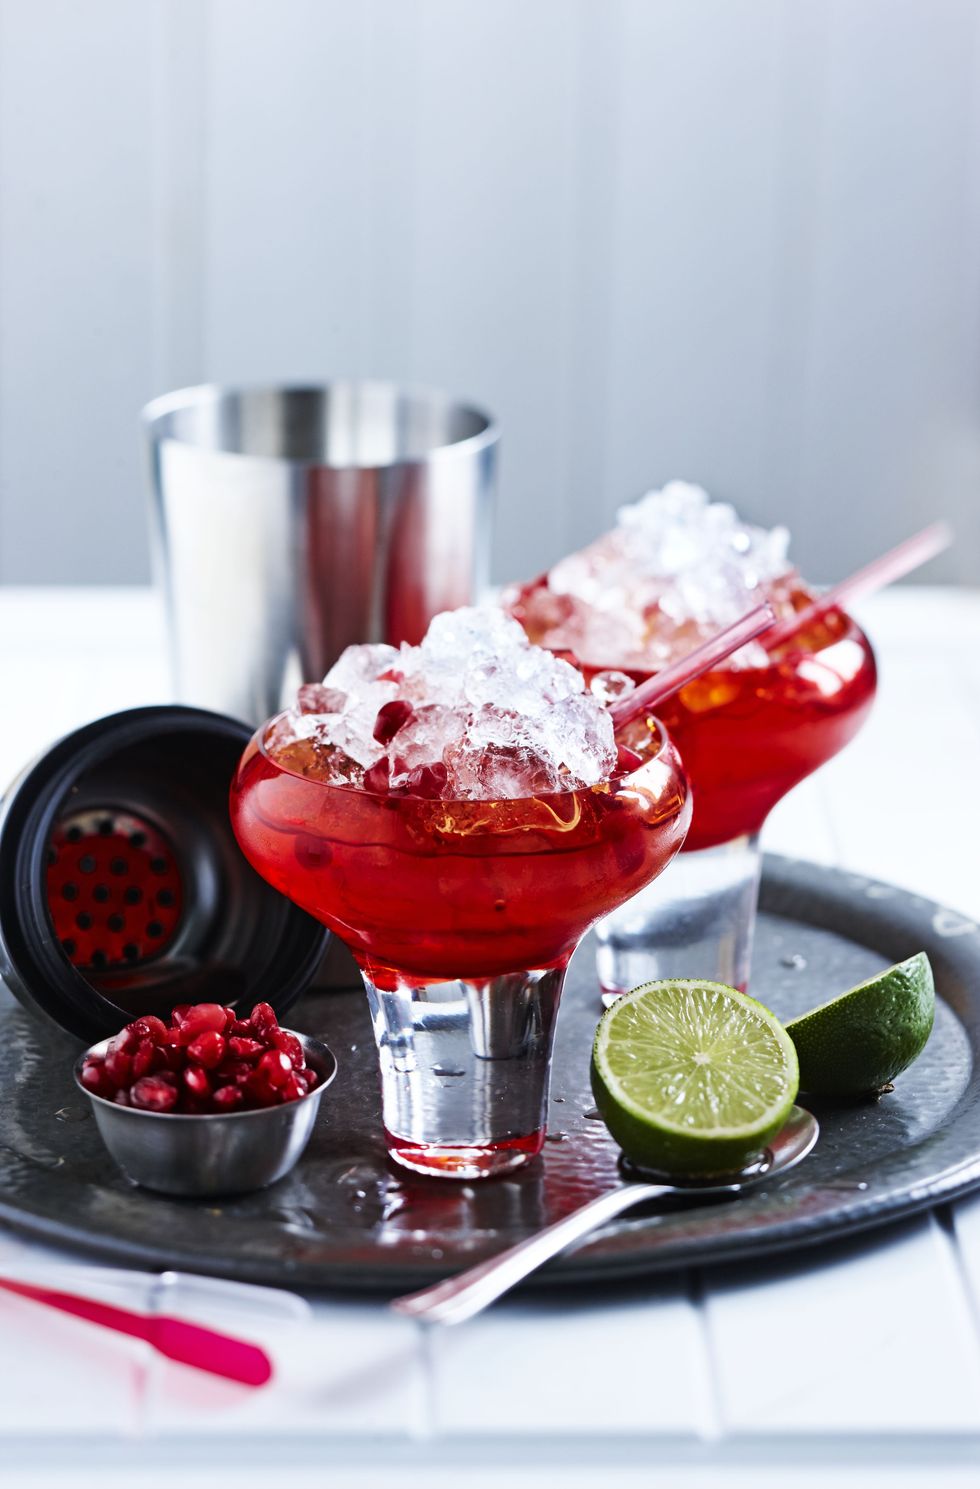 <p><a href="http://toriavey.com/toris-kitchen/2013/12/pomegranate-champagne-cocktail/" target="_blank">Serve chilled</a> in the summer and without ice during the holiday season. </p><p><strong>Ingredients:</strong>
</p><p>2 Tbsp. Pure 100% Pomegranate Juice, chilled</p><p>1 Tbsp. Cointreau</p><p>1/2 tsp. Pomegranate Seeds</p><p>1/2 tsp. Sweetened Lime Juice</p><p>Champagne or Sarkling Wine, chilled</p><p><strong>Directions: </strong></p><p>Spoon the pomegranate seeds into the bottom of a glass. Add pomegranate juice, Cointreau, and sweetened lime juice. Top off the flute with chilled champagne or sparkling wine and ice. <br></p>